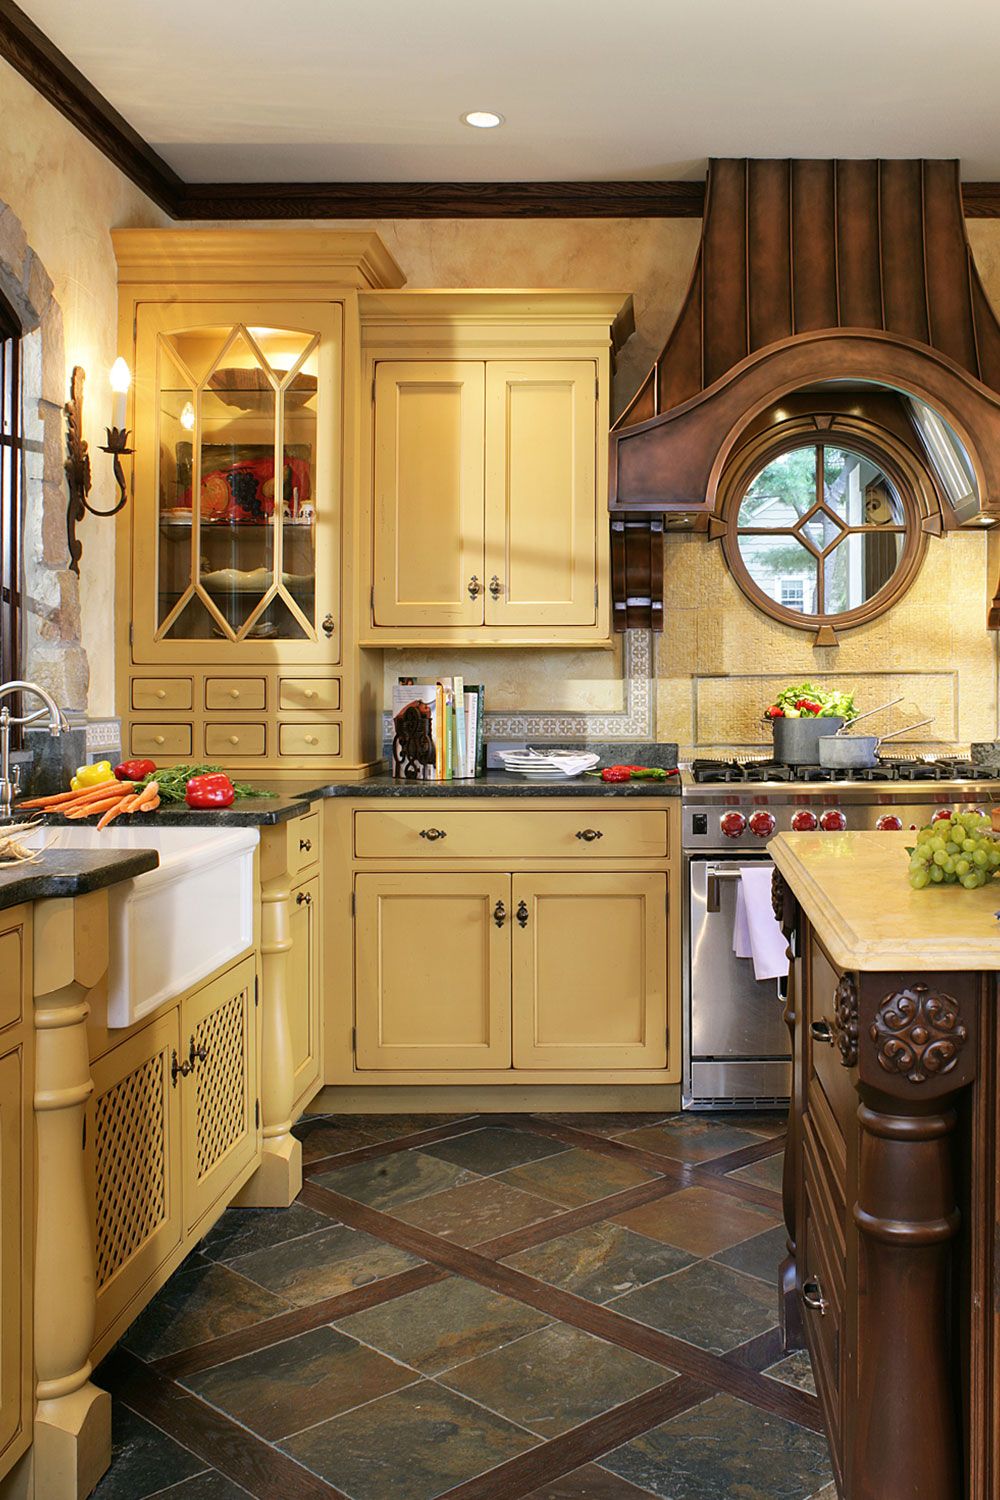 yellow kitchen color ideas